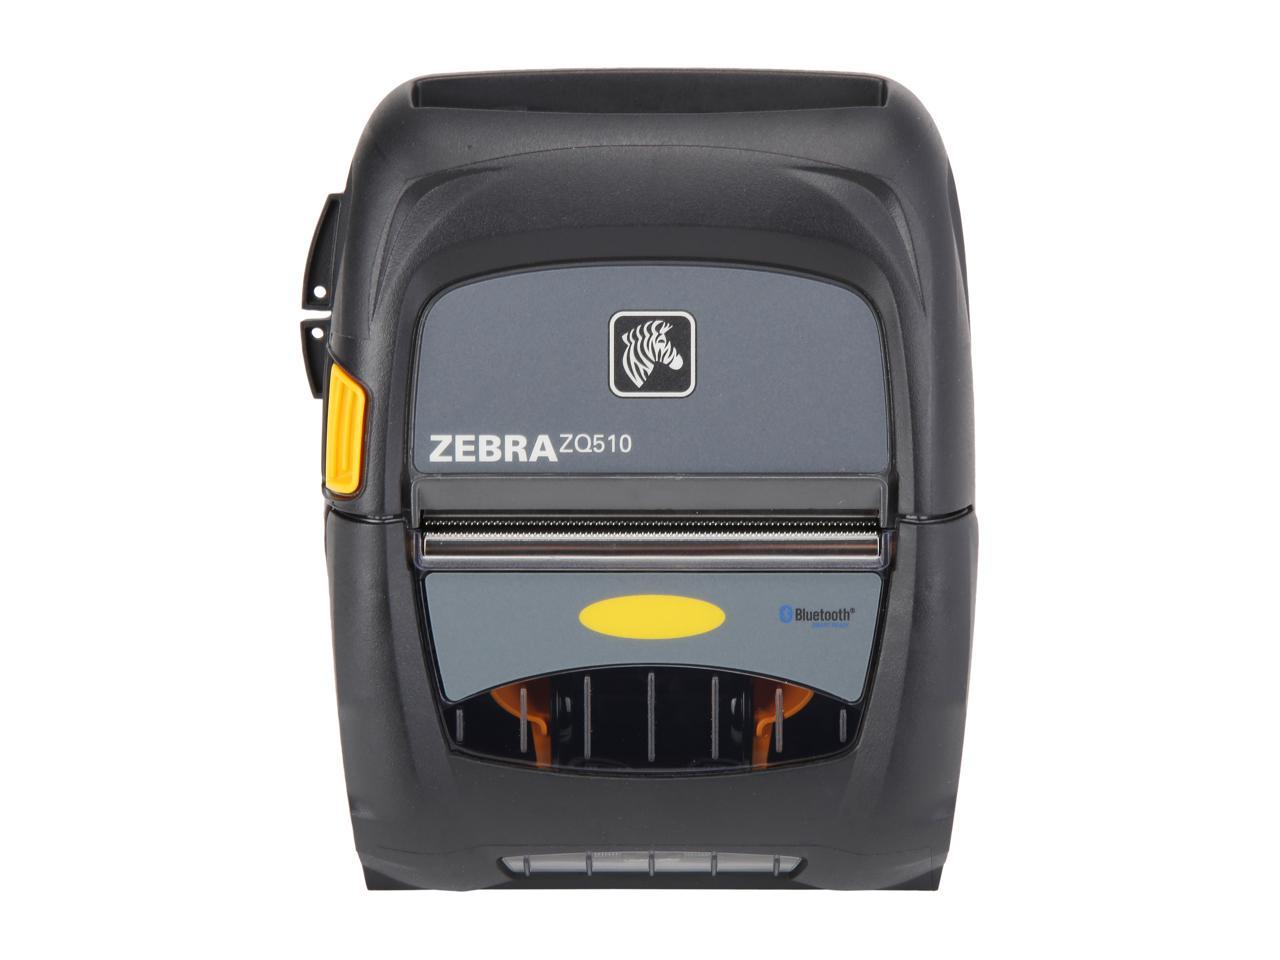 Zebra Zq510 3 Mobile Direct Thermal Receipt And Label Printer 203 Dpi Bluetooth 40 Linered 0258